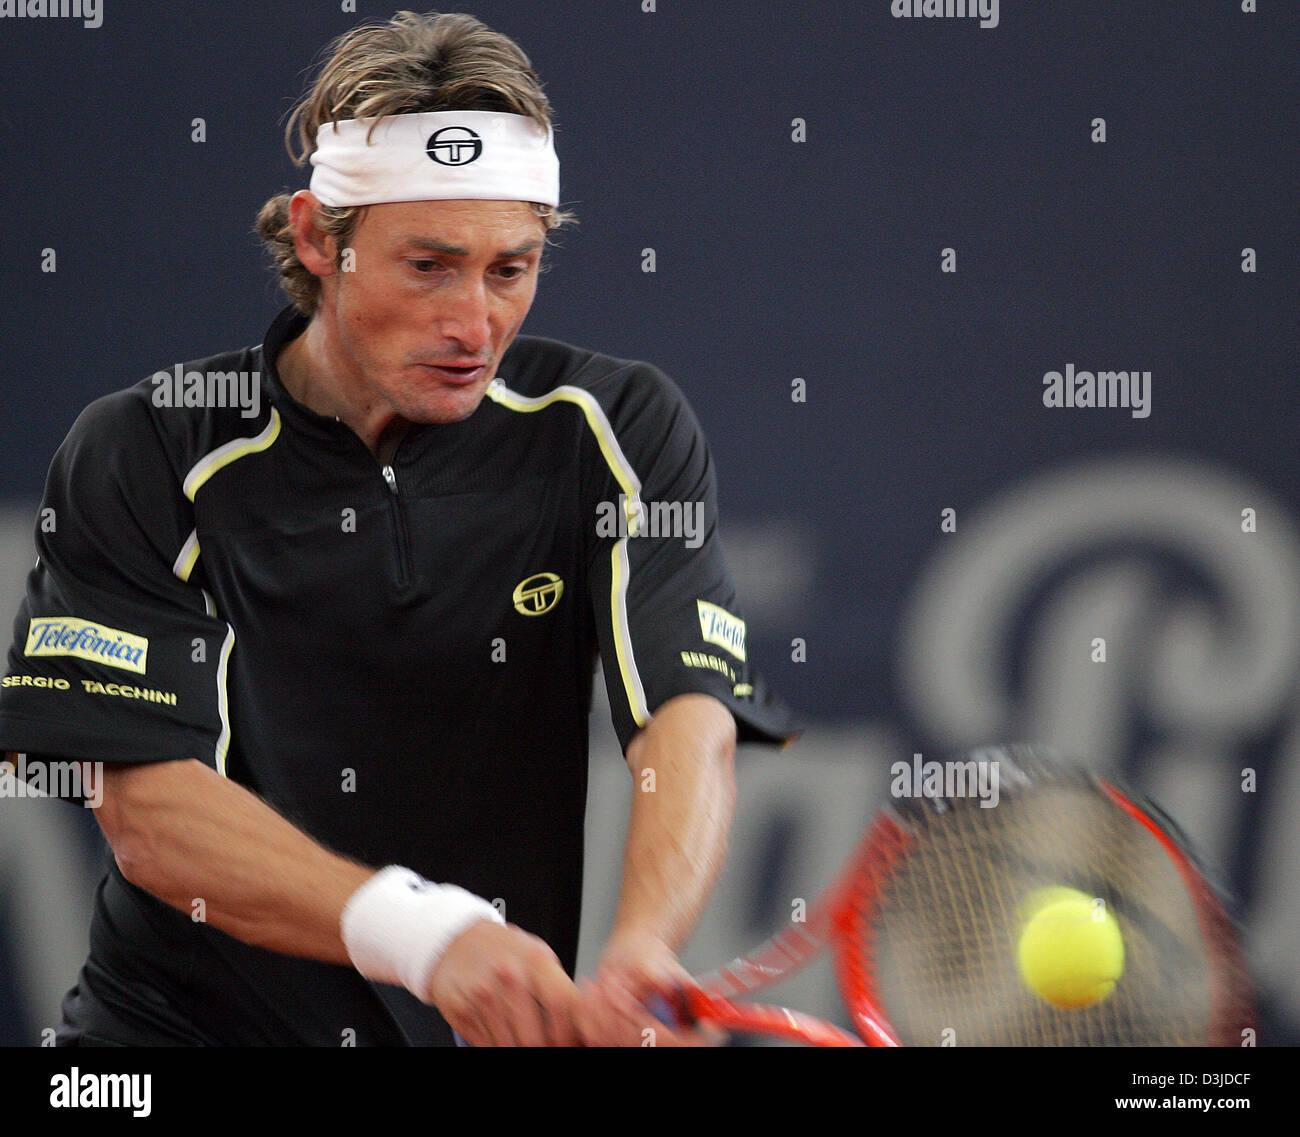 (dpa) - Unseeded Spanish tennis pro Juan Carlos Ferrero returns the ball during his match against Russian Marat Safin at the ATP Tennis Master Tournament in Hamburg, Germany, 11 May 2005. Ferrero won the match 6-4 and 6-2. Stock Photo